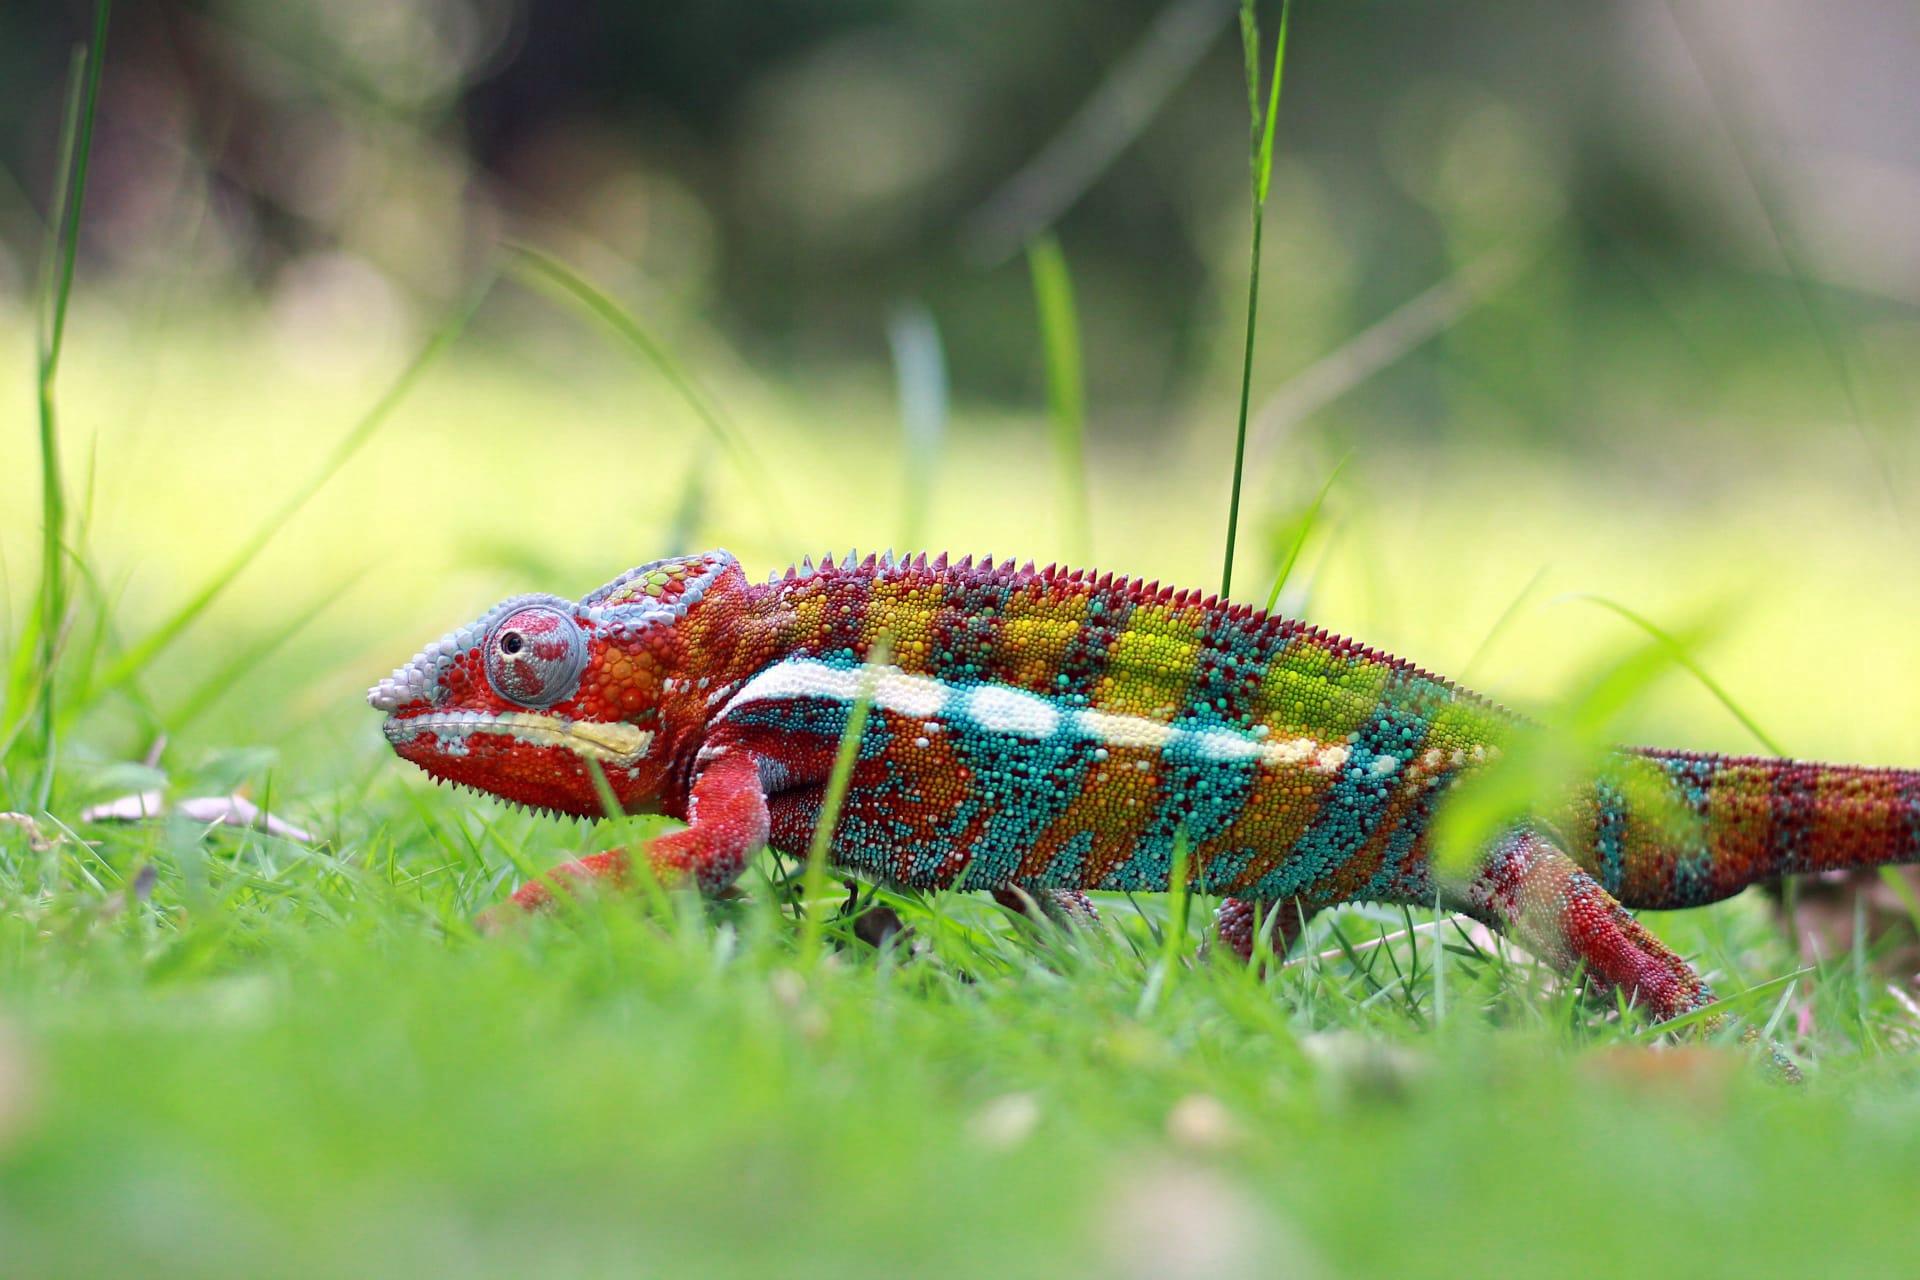 Panther chameleon pictures